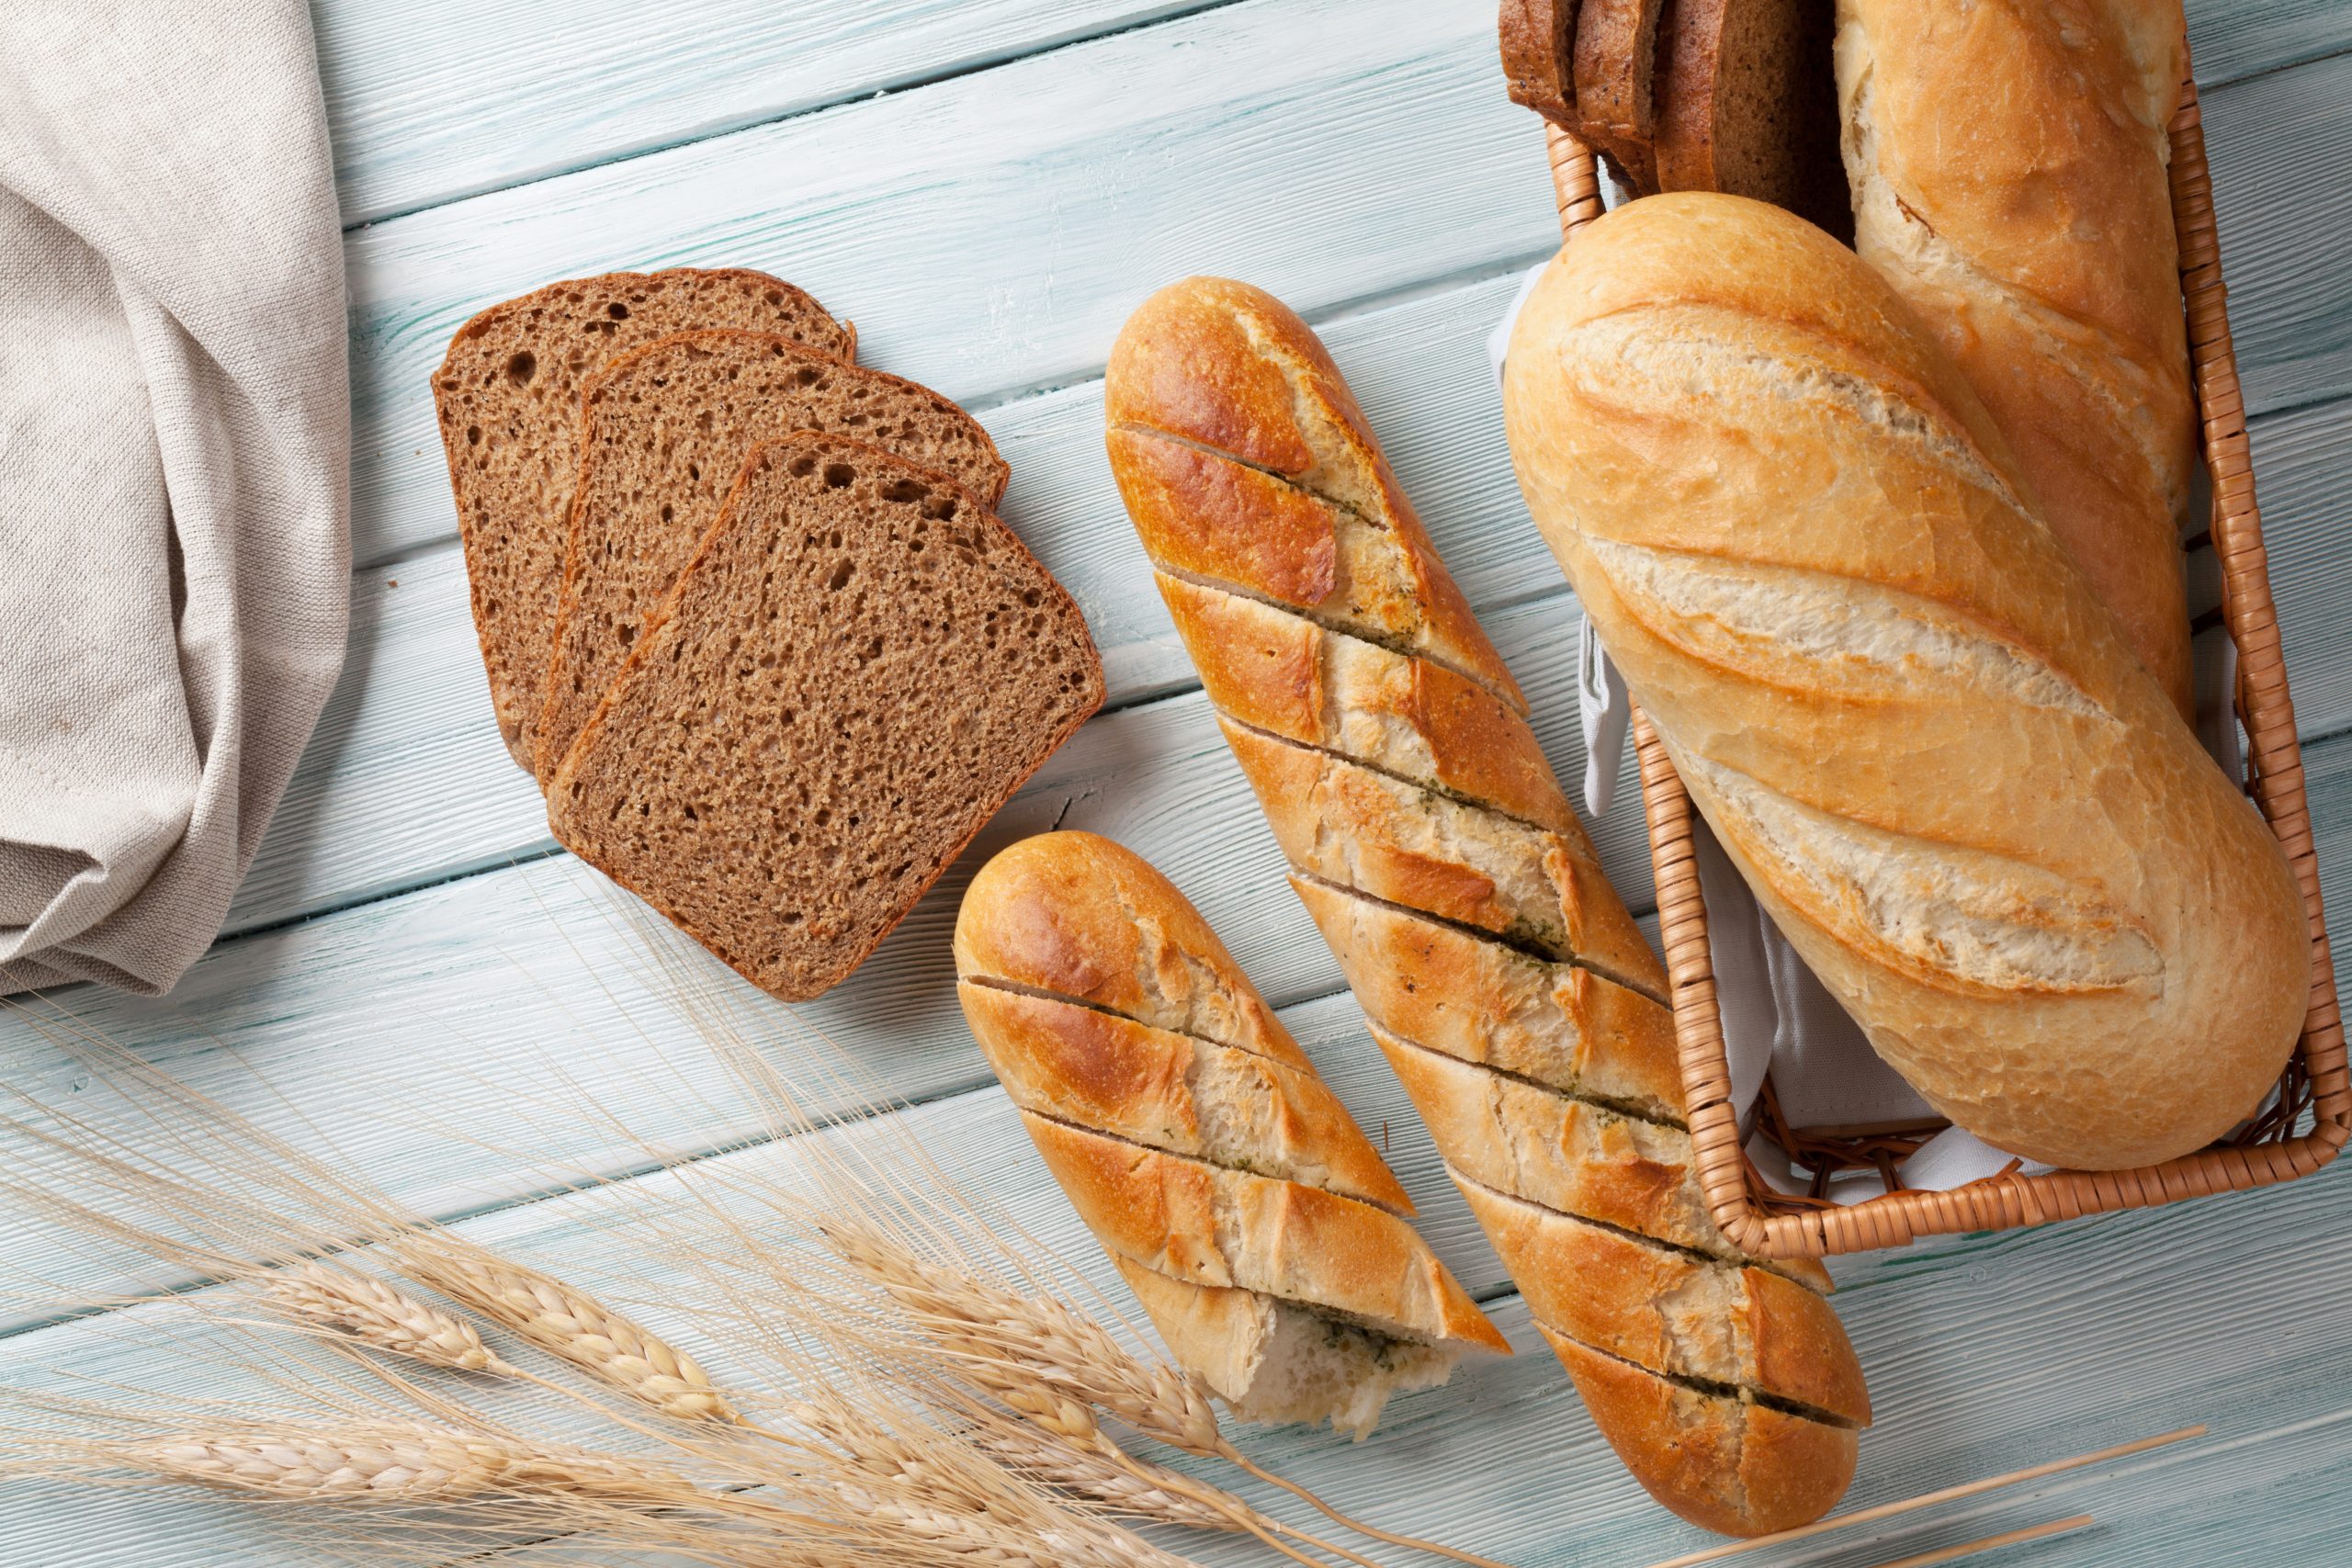 How to choose a healthy bread loaf without any misconceptions